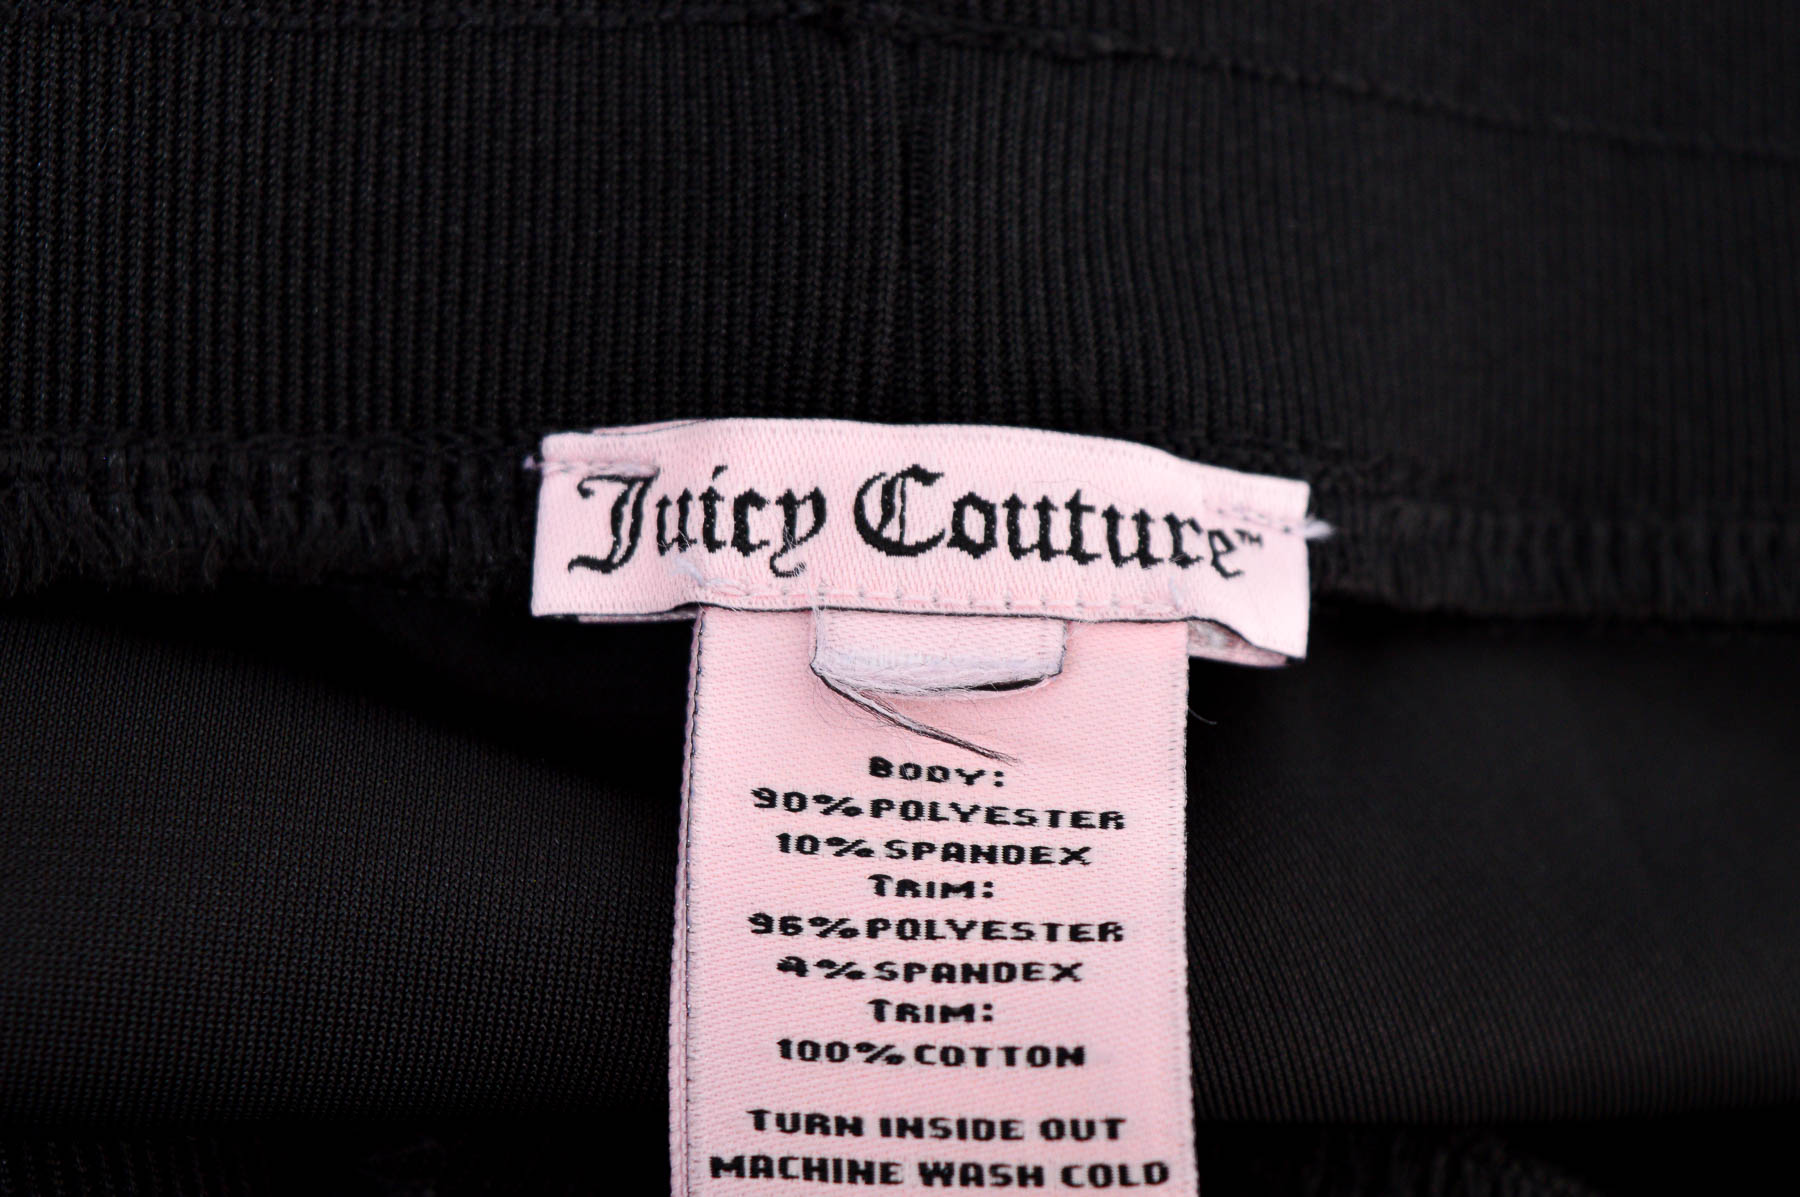 Female sports wear - Juicy Couture - 2